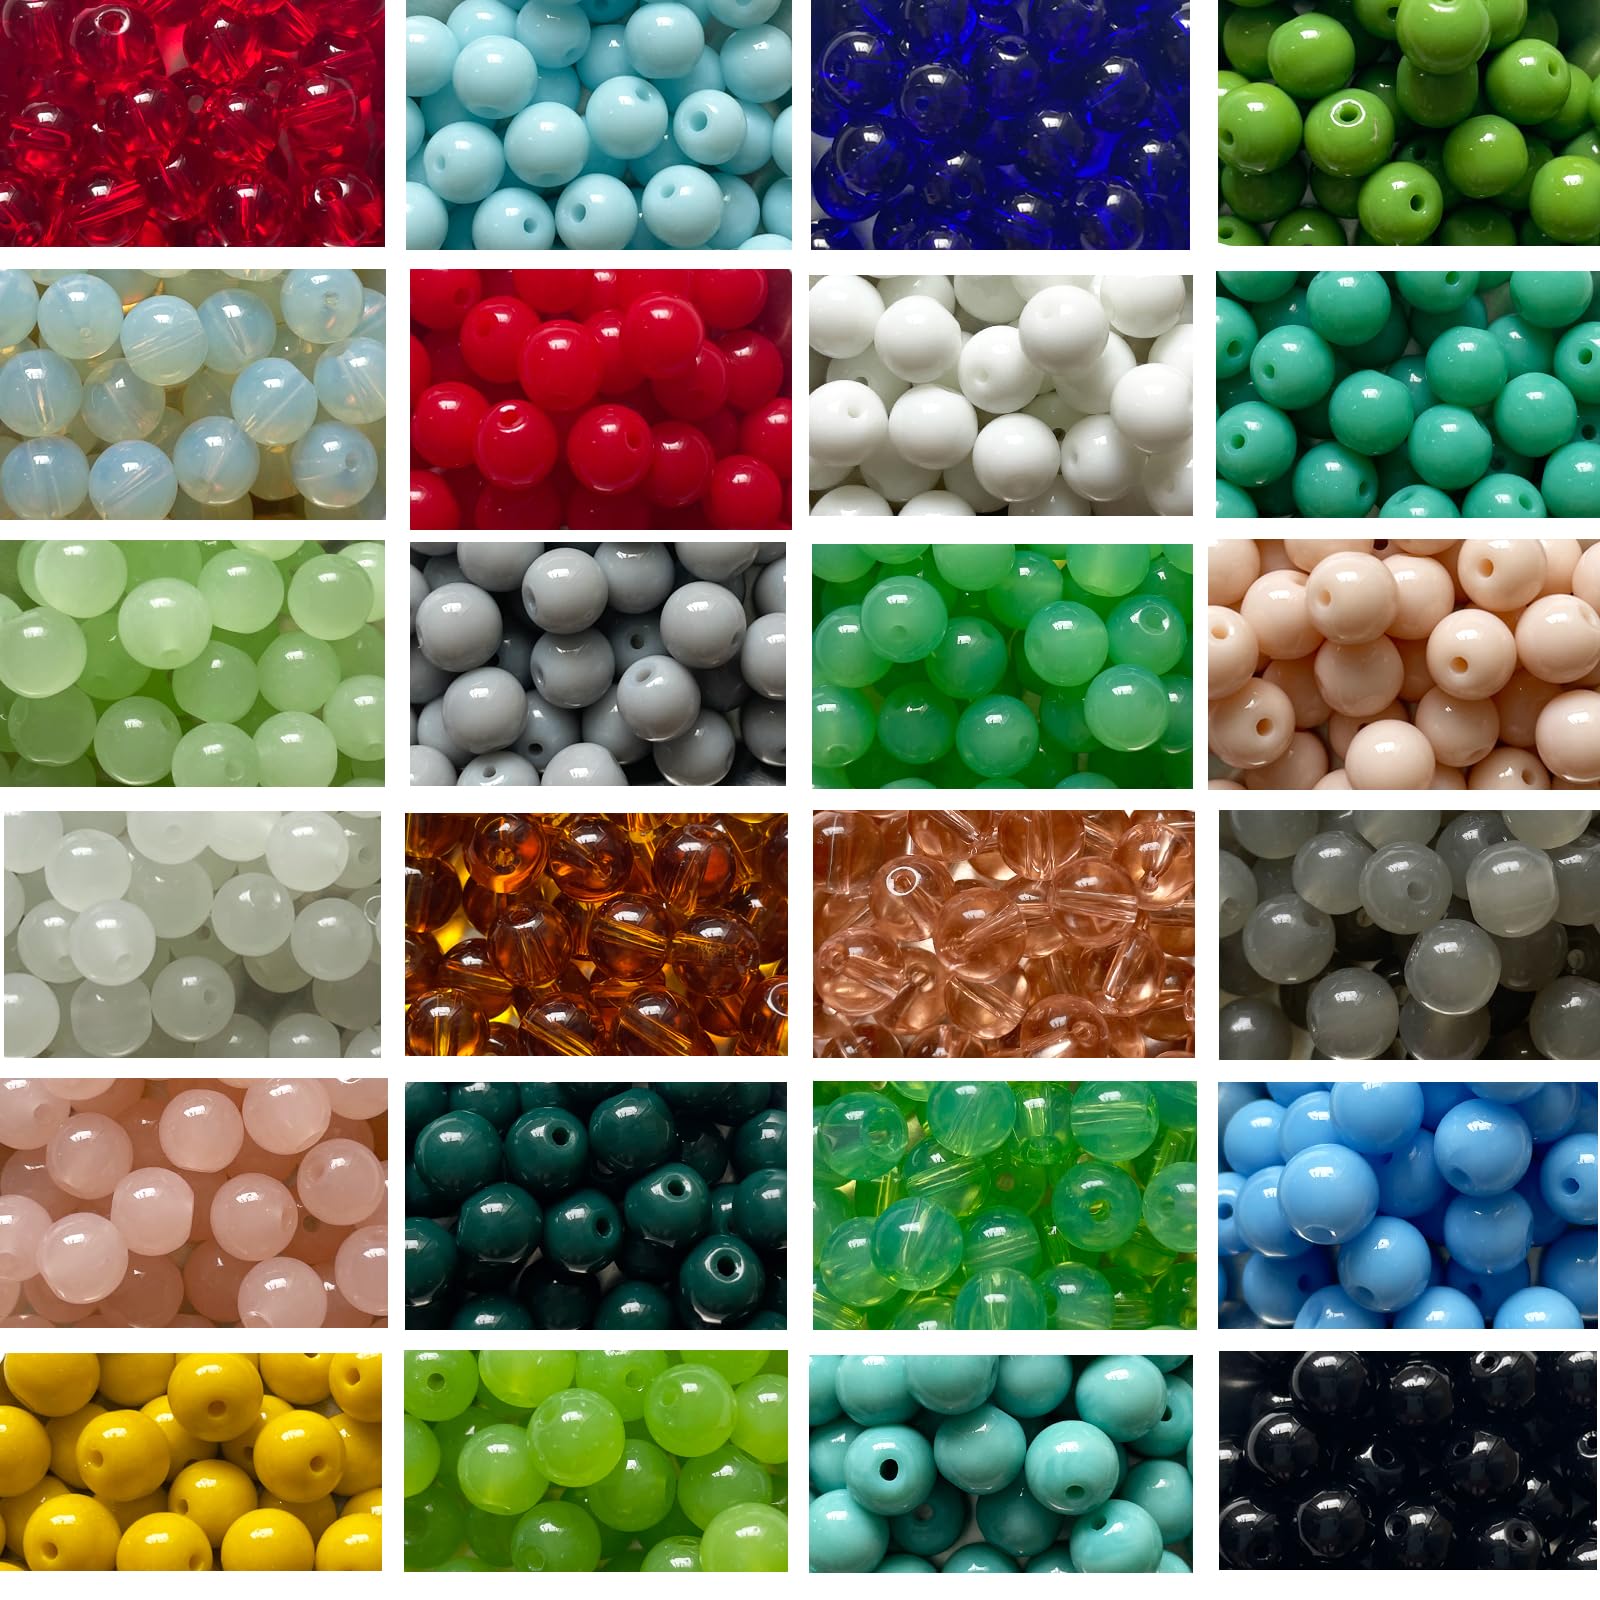 Svartur Bead Board with Beads, 1200 Pcs 8mm Glass Beads & Bead Board with case, Complete Jewelry Making Beading Set